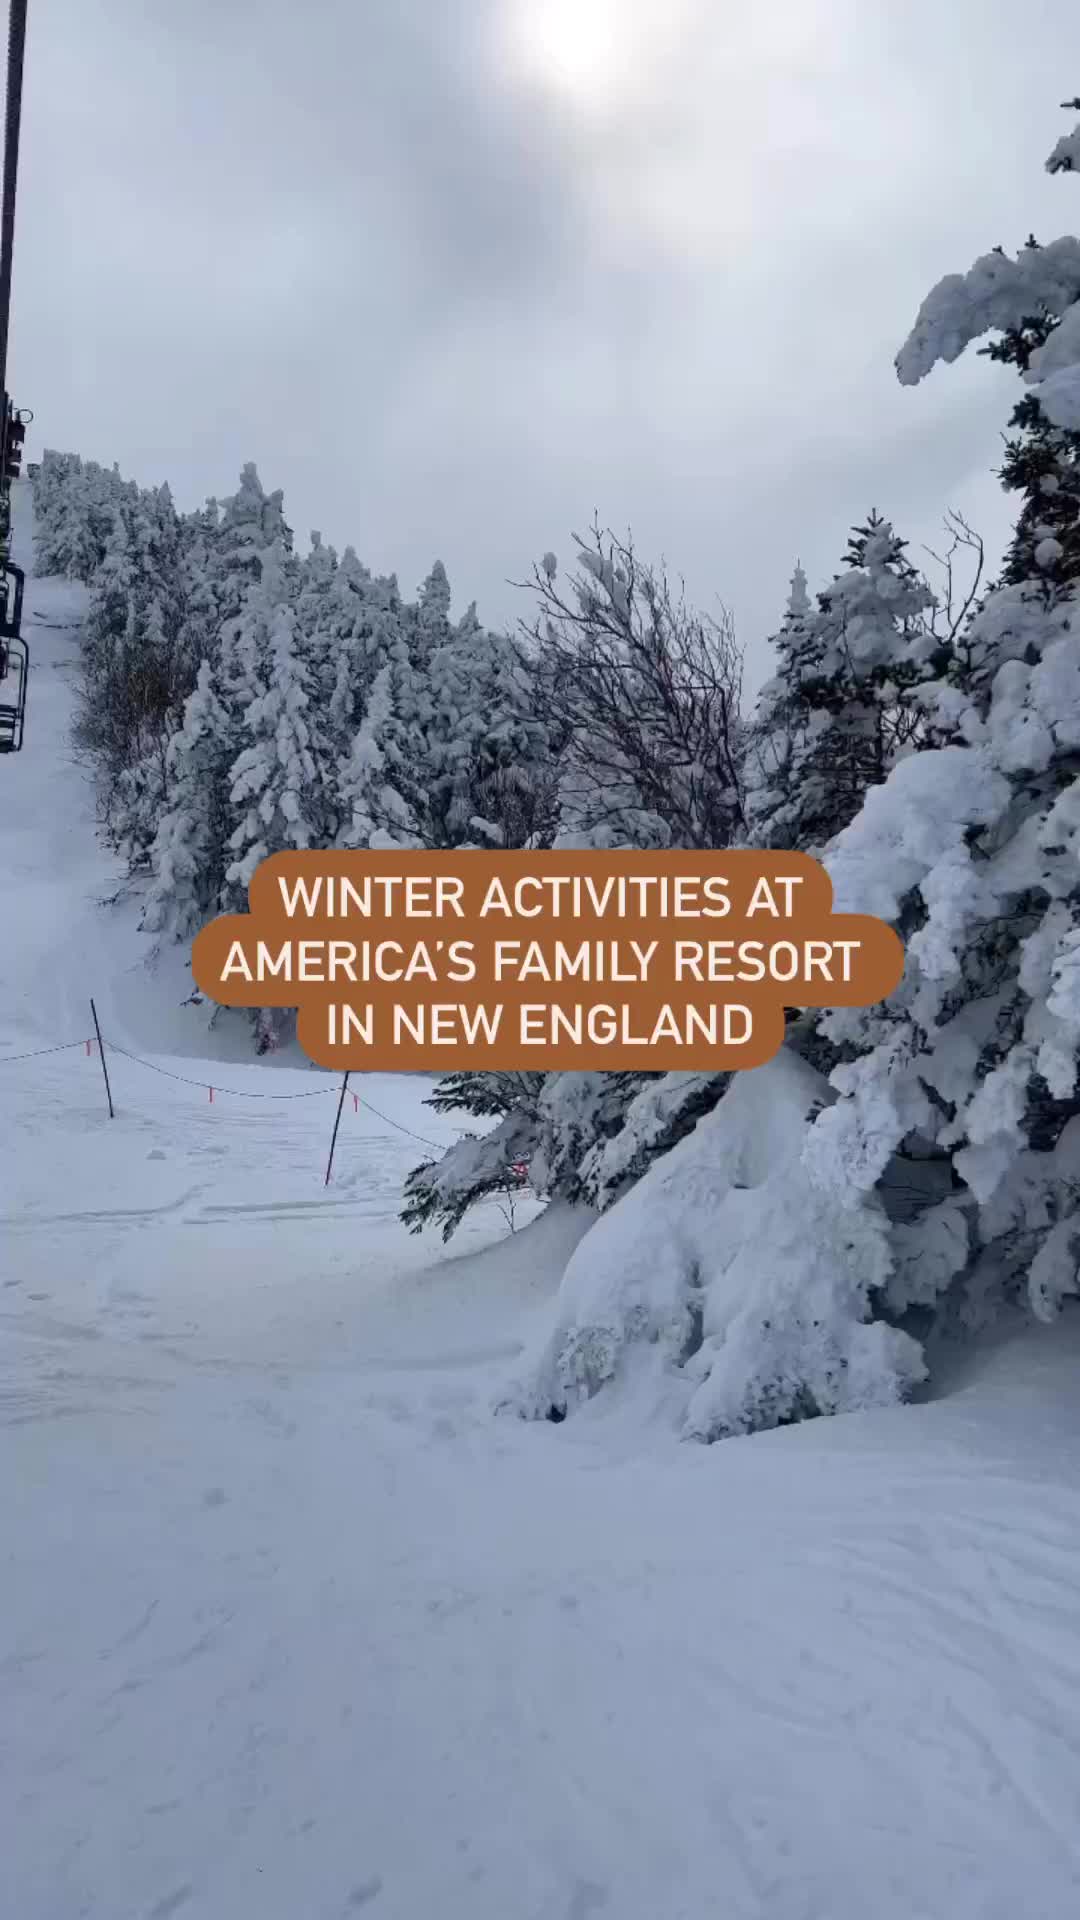 Winter Fun at Smugglers' Notch Resort, Vermont